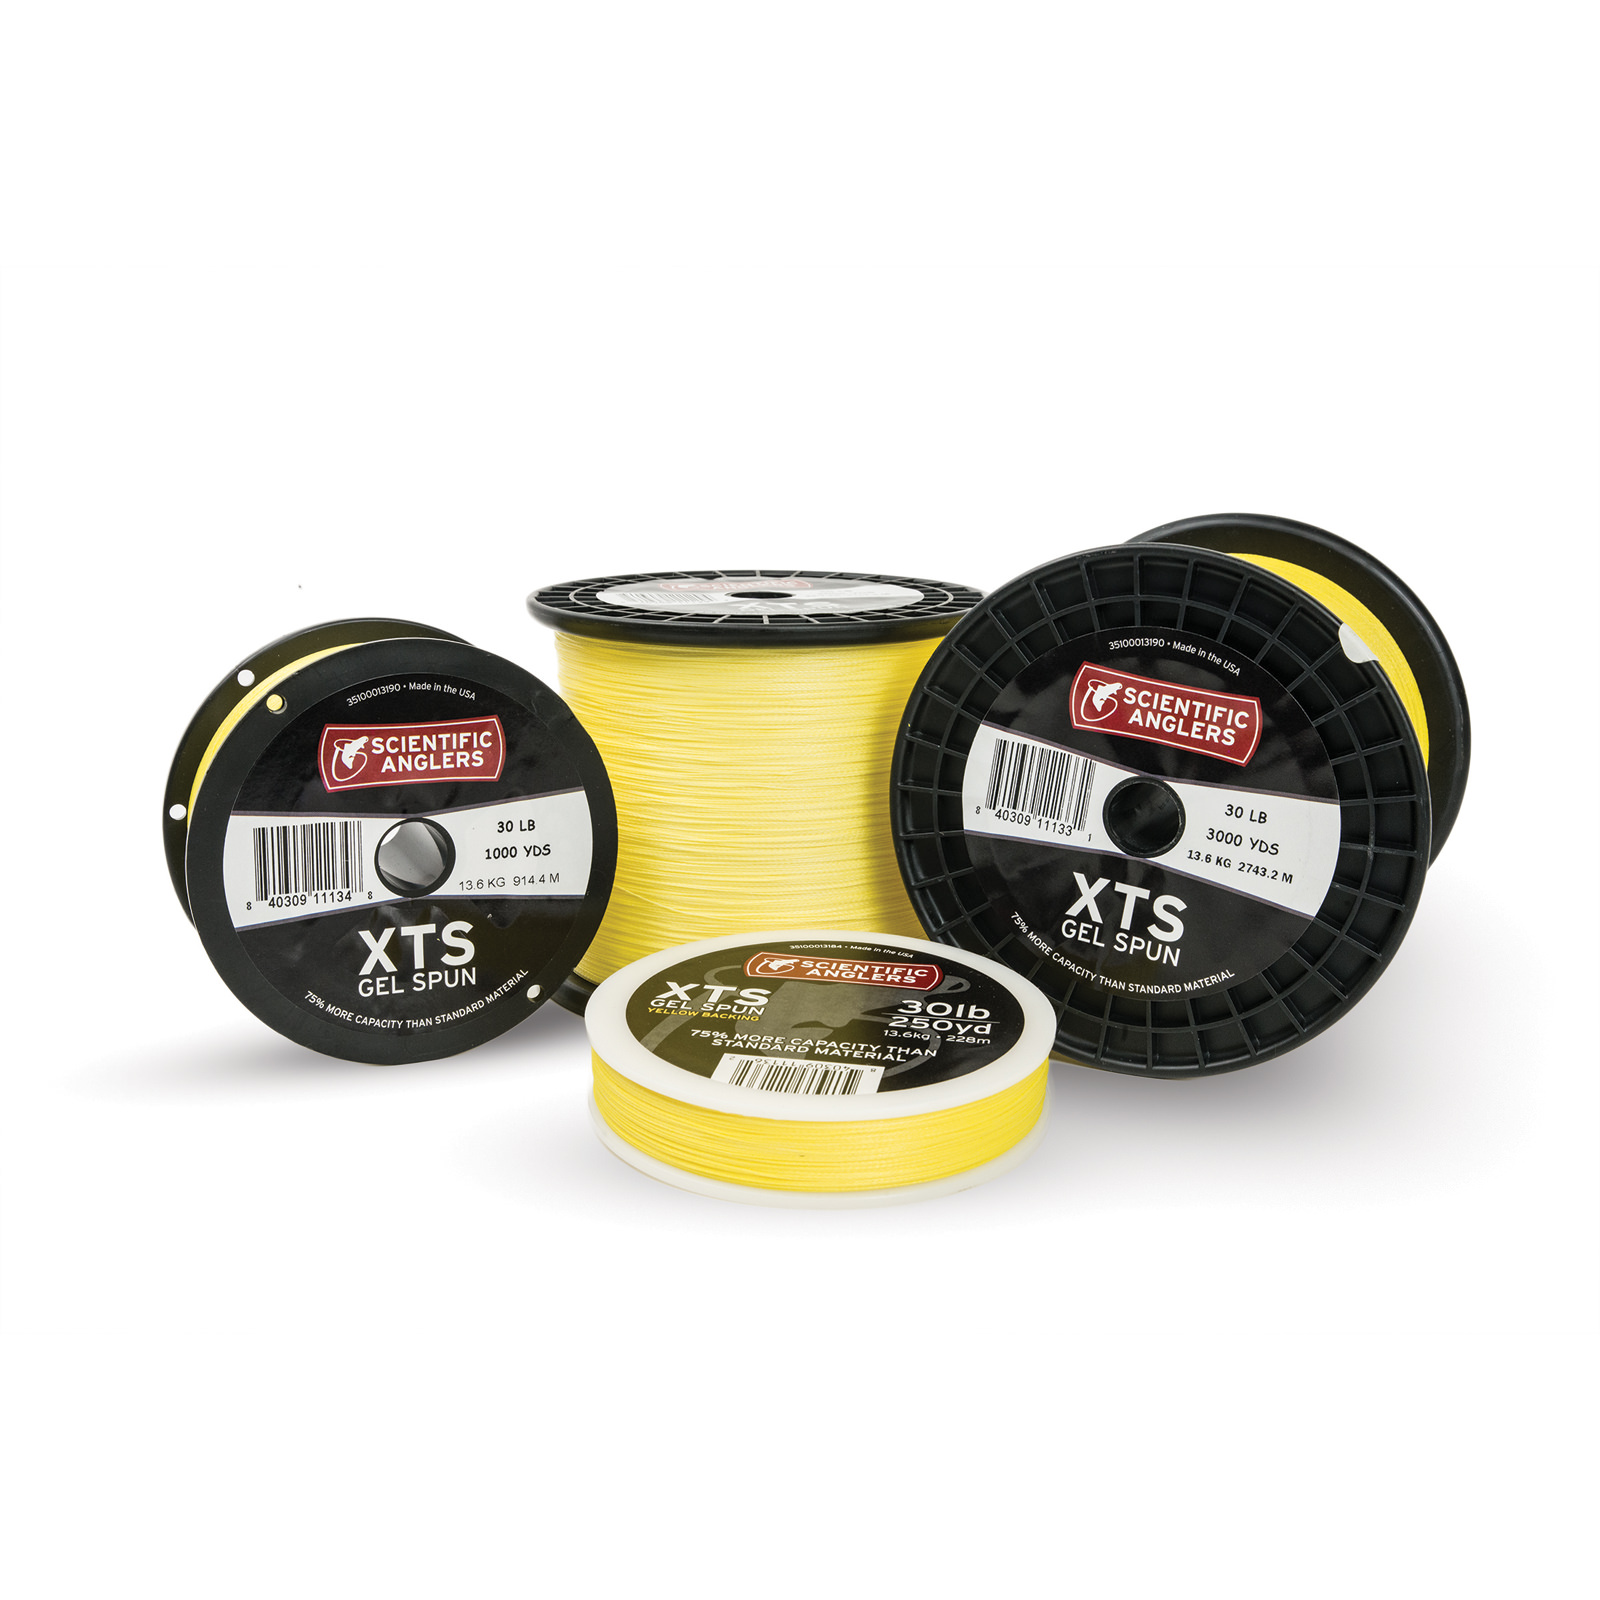 Scientific Anglers XTS Gel Spun Fly Line Backing 50 lbs., Yellow